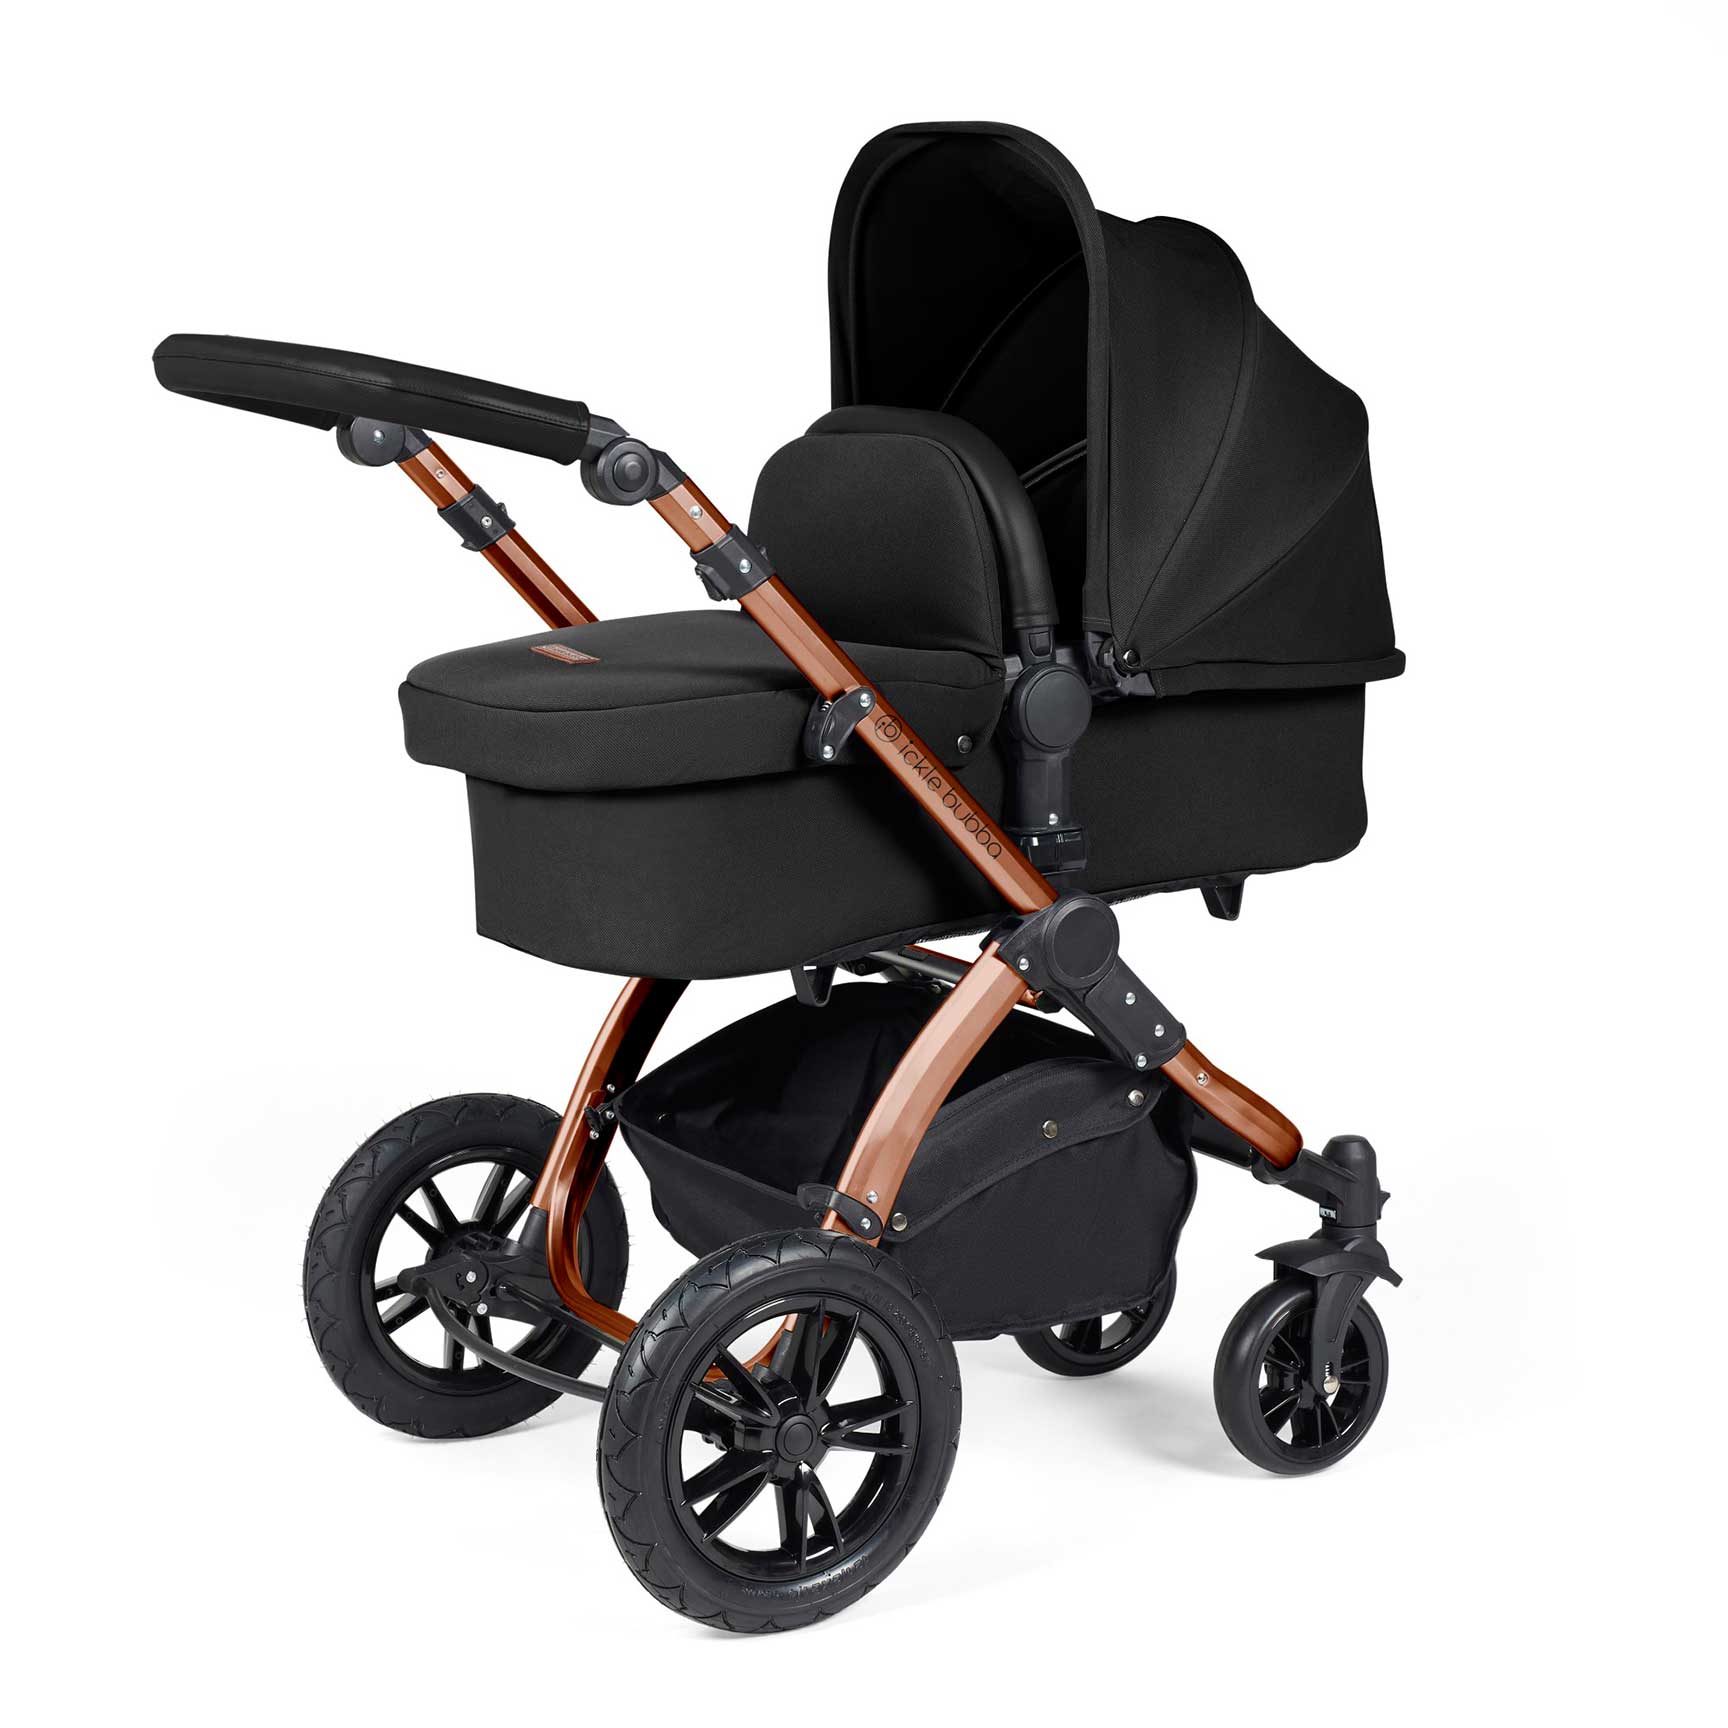 Ickle Bubba travel systems Ickle Bubba Stomp Luxe All-in-One Travel System with Isofix Base - Bronze/Midnight/Black 10-011-300-139